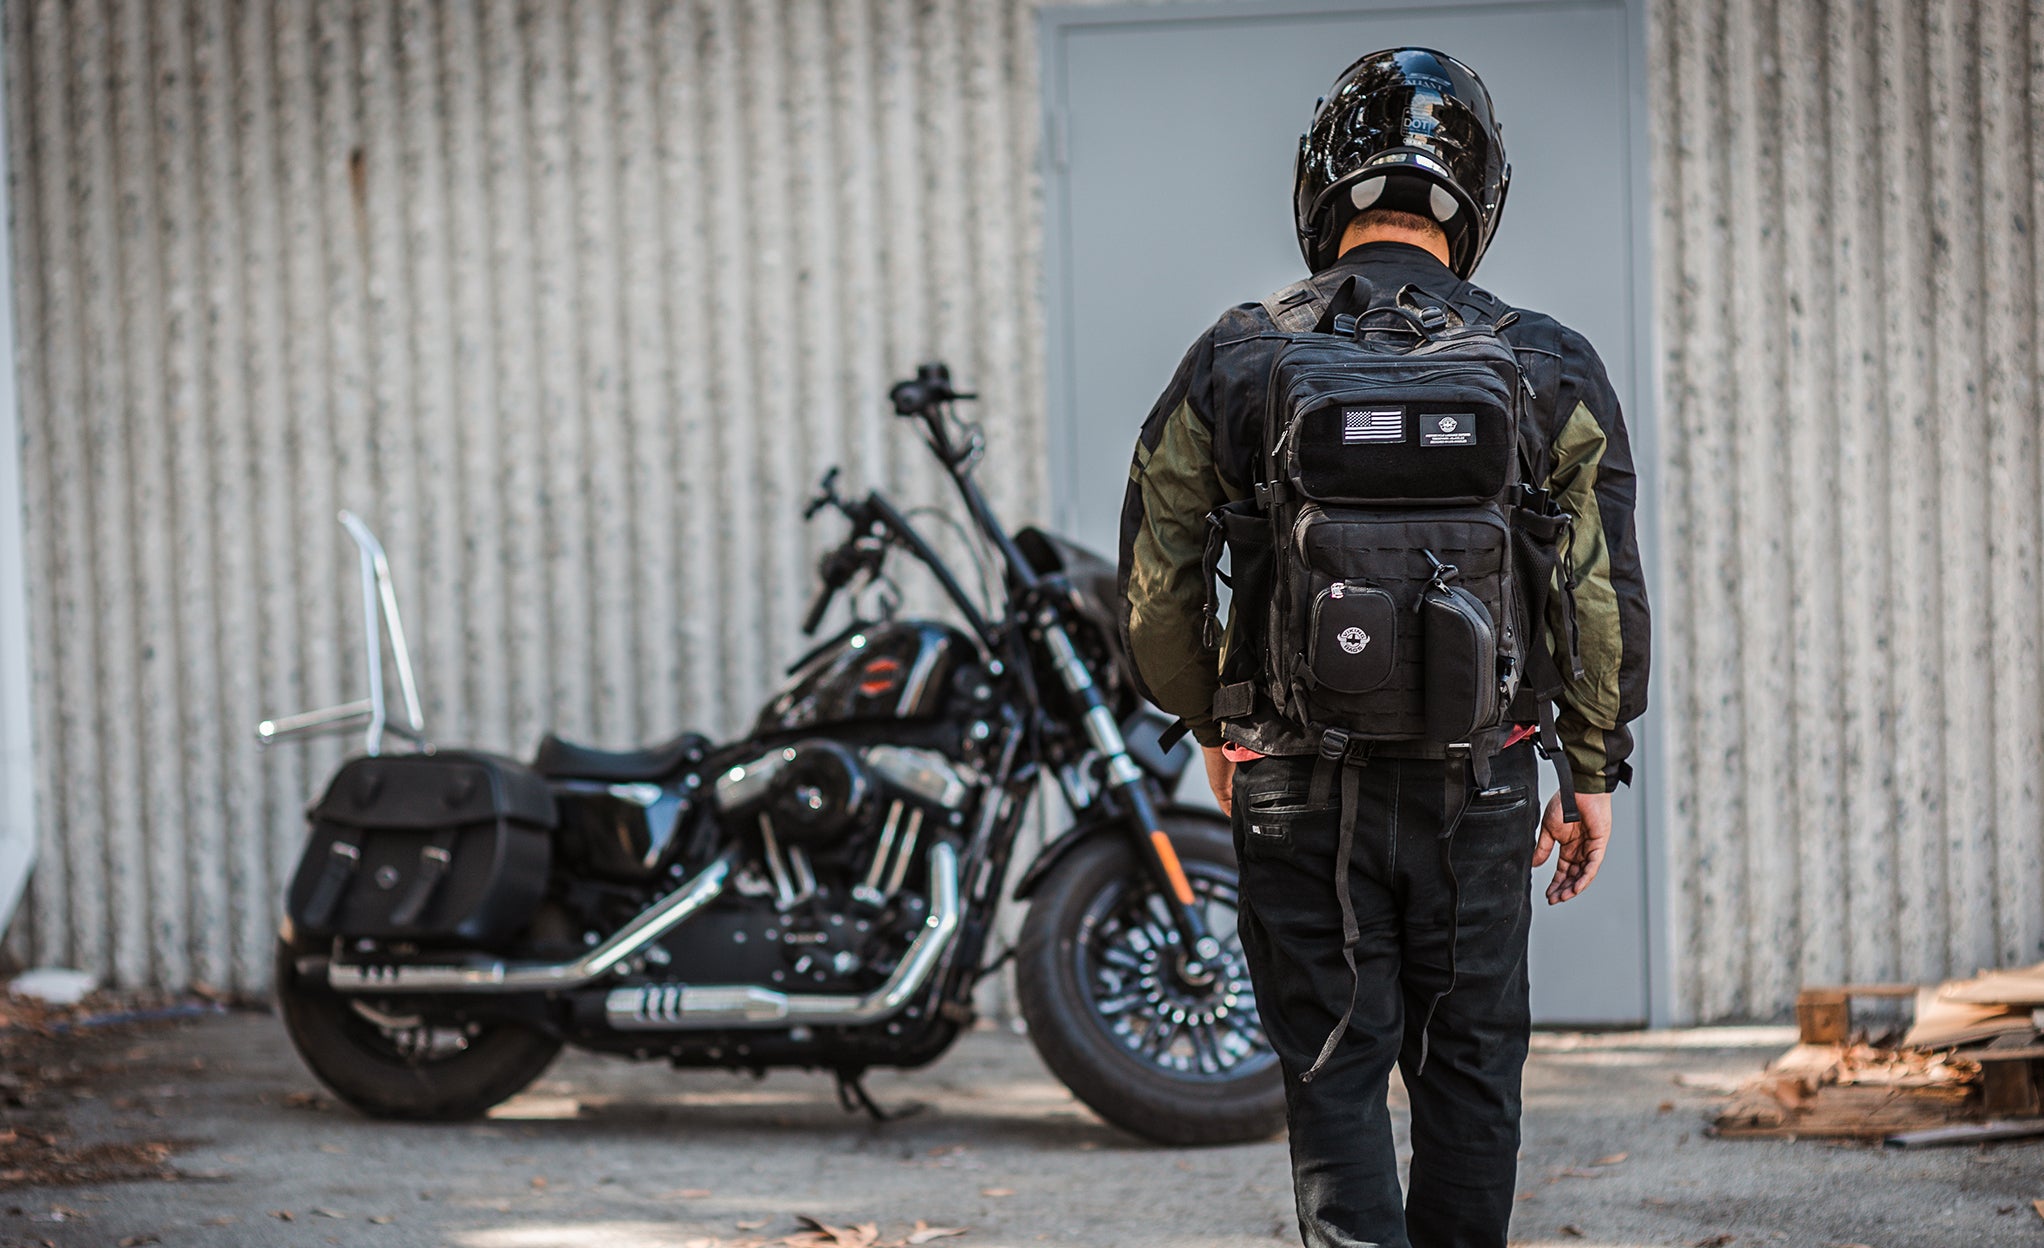 45L - Tactical XL Hyosung Motorcycle Backpack @expand